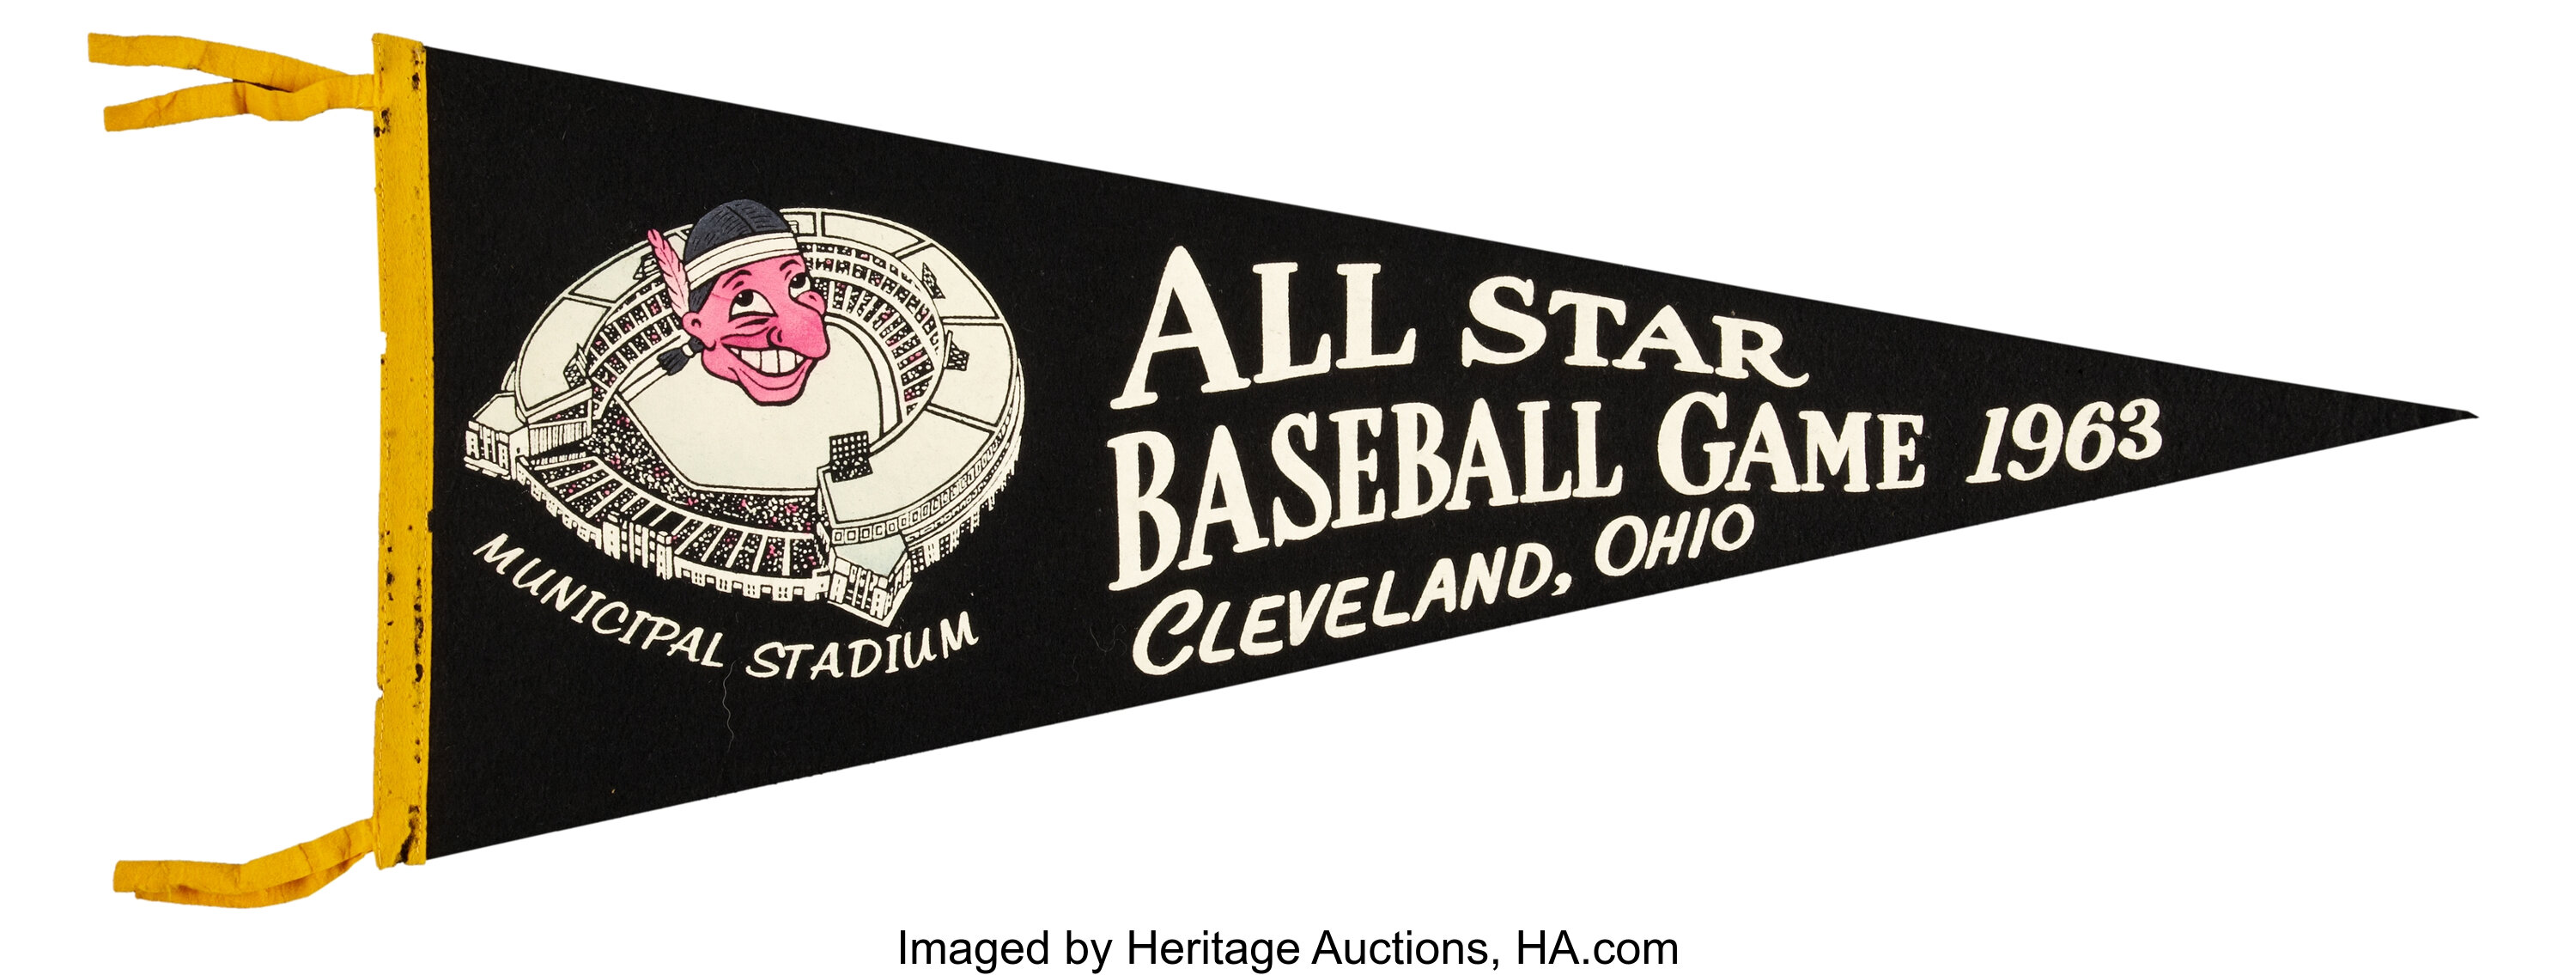 Sold at Auction: Two Vintage Cincinnati Reds Pennants